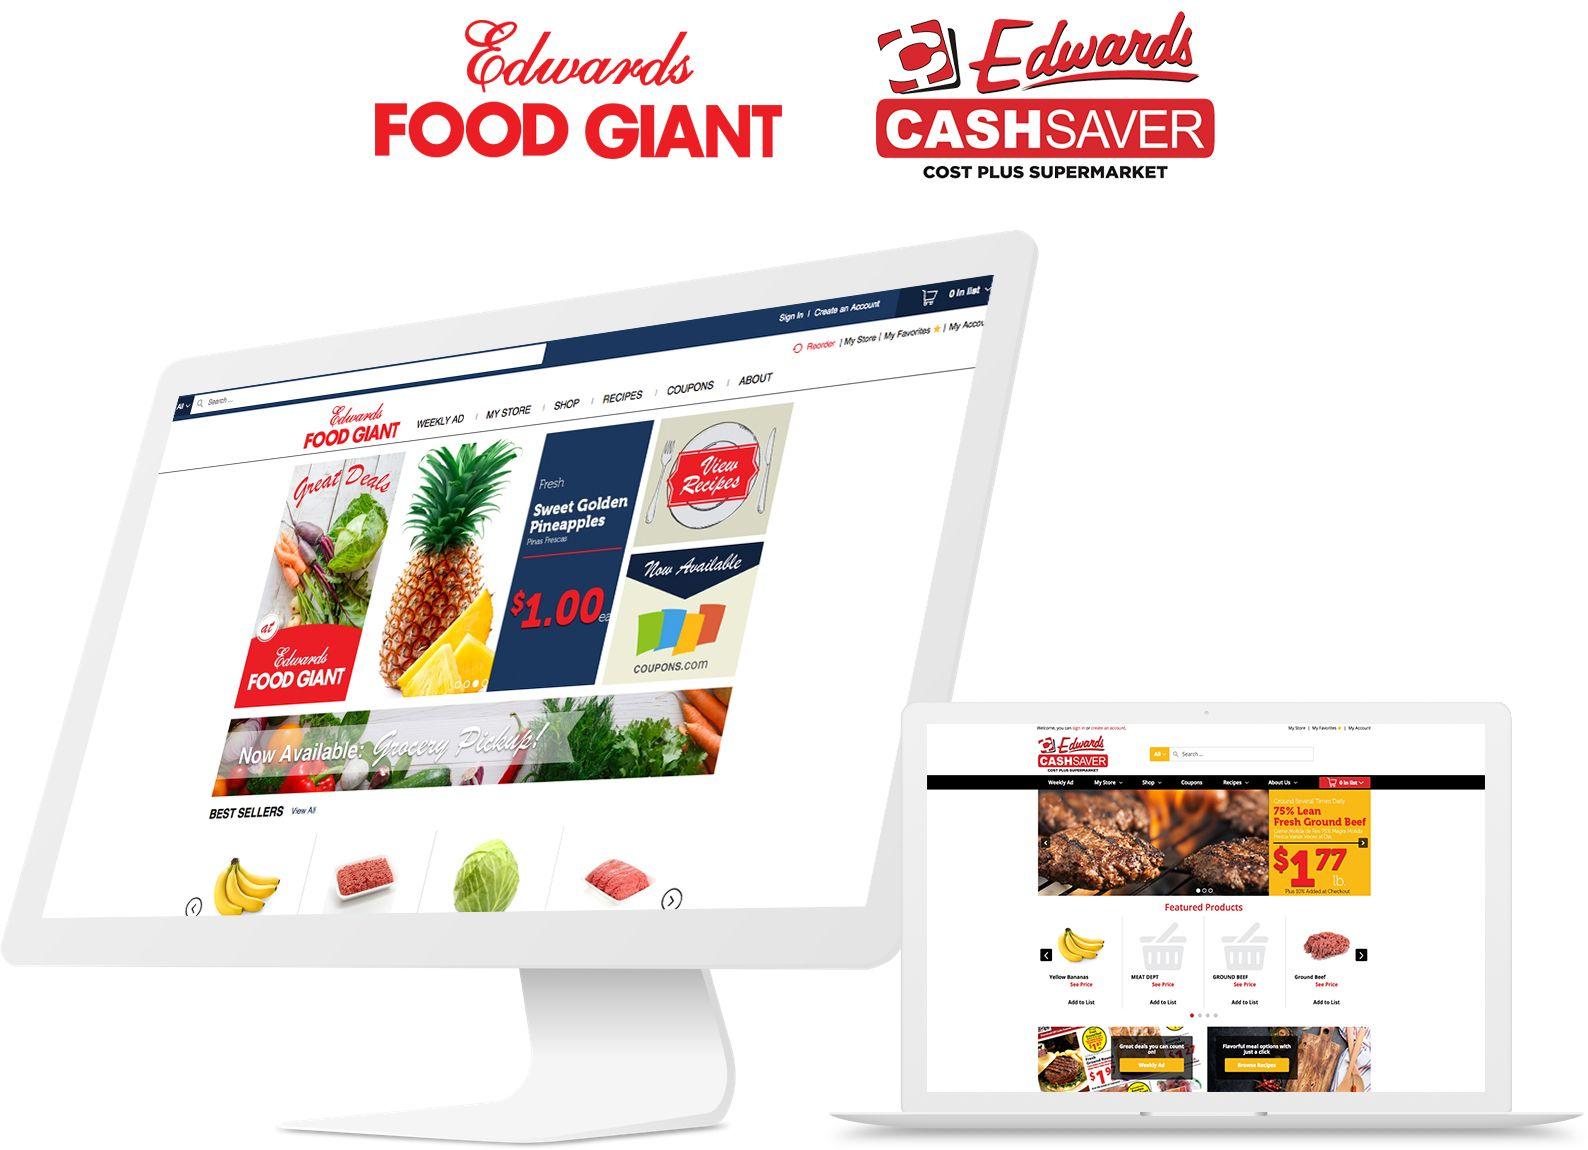 Freshop Logo - Edwards Launches New Online Grocery Capabilities with Freshop — Freshop